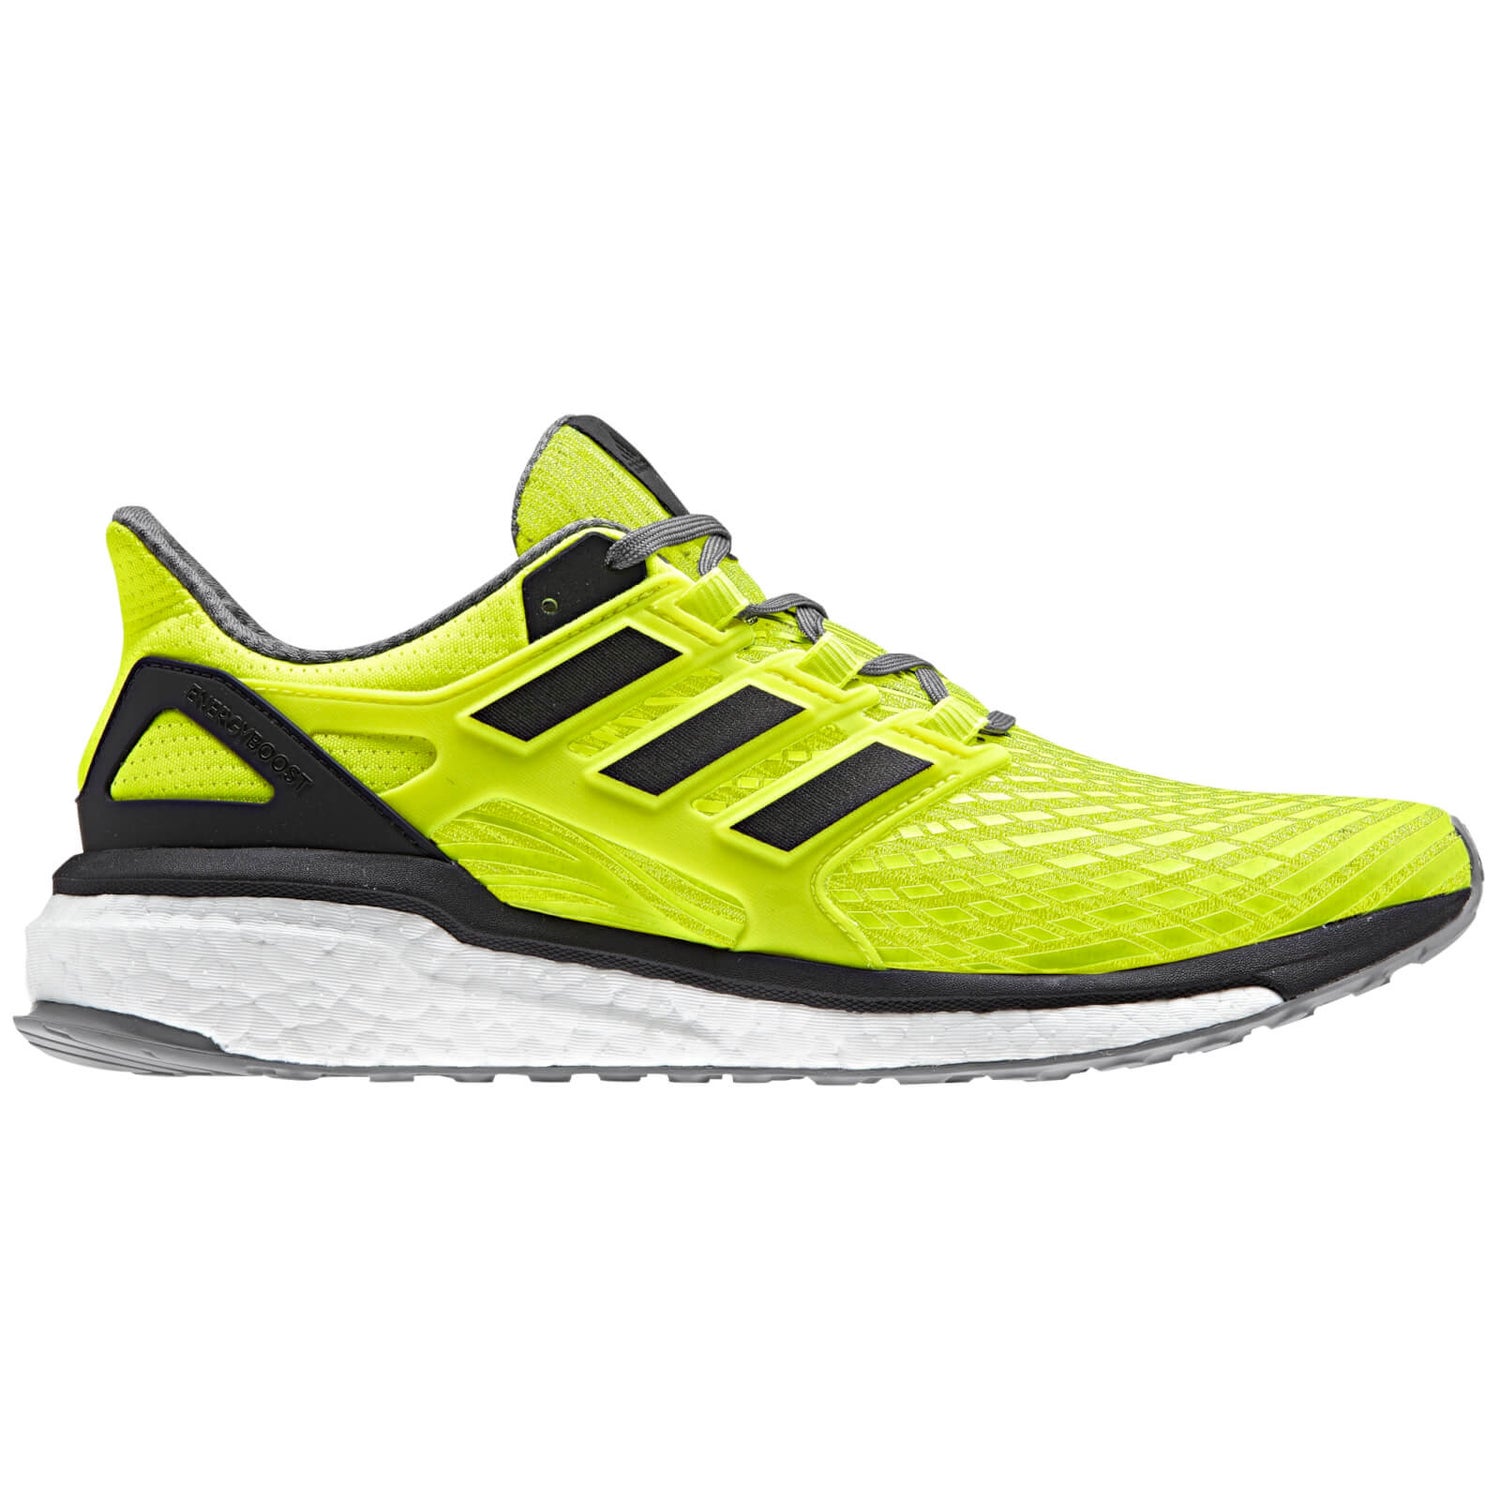 adidas Men's Energy Boost Running Shoes - Yellow 